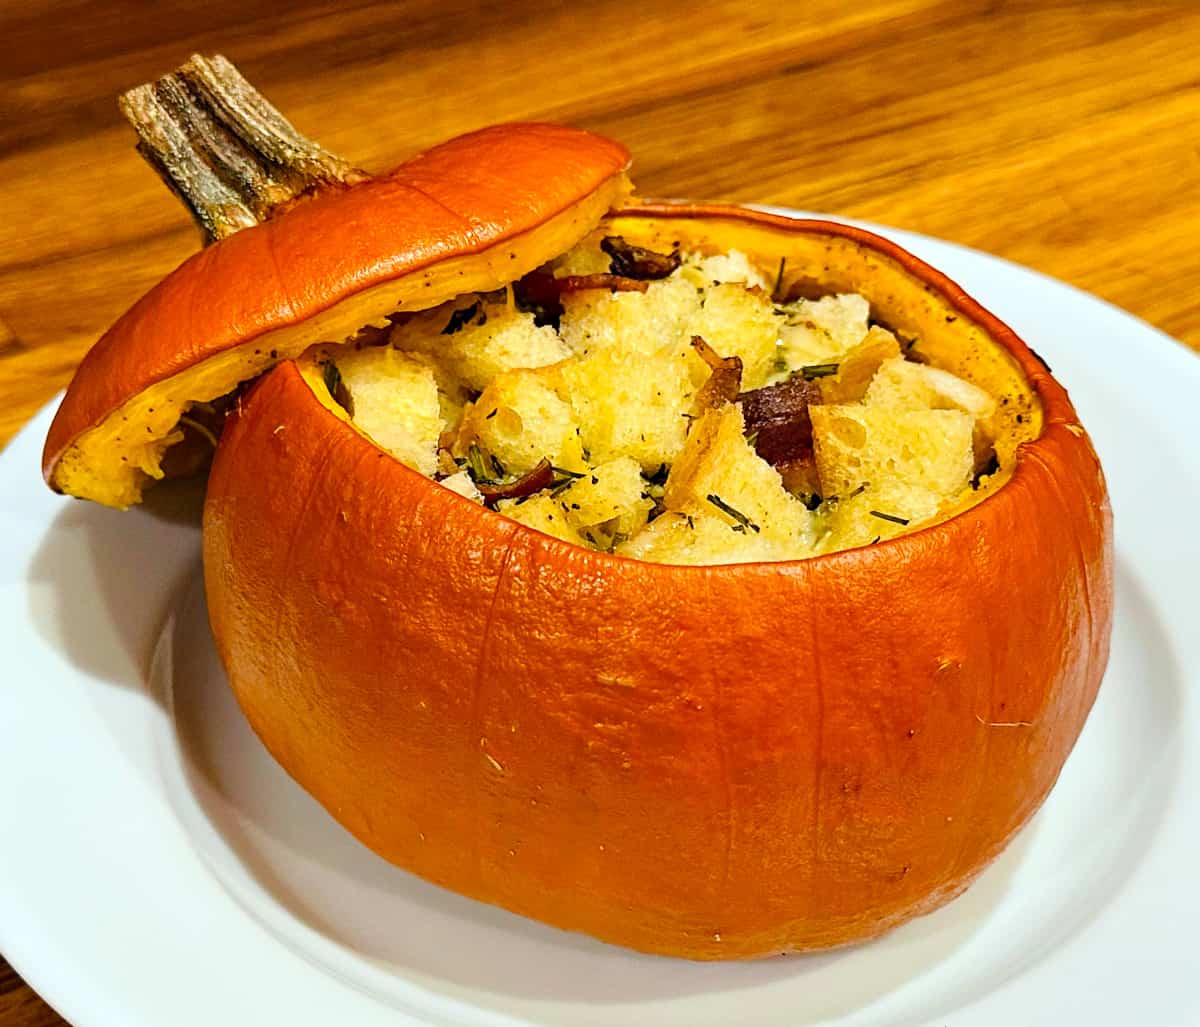 Pumpkin stuffed with everything good served on a white plate.